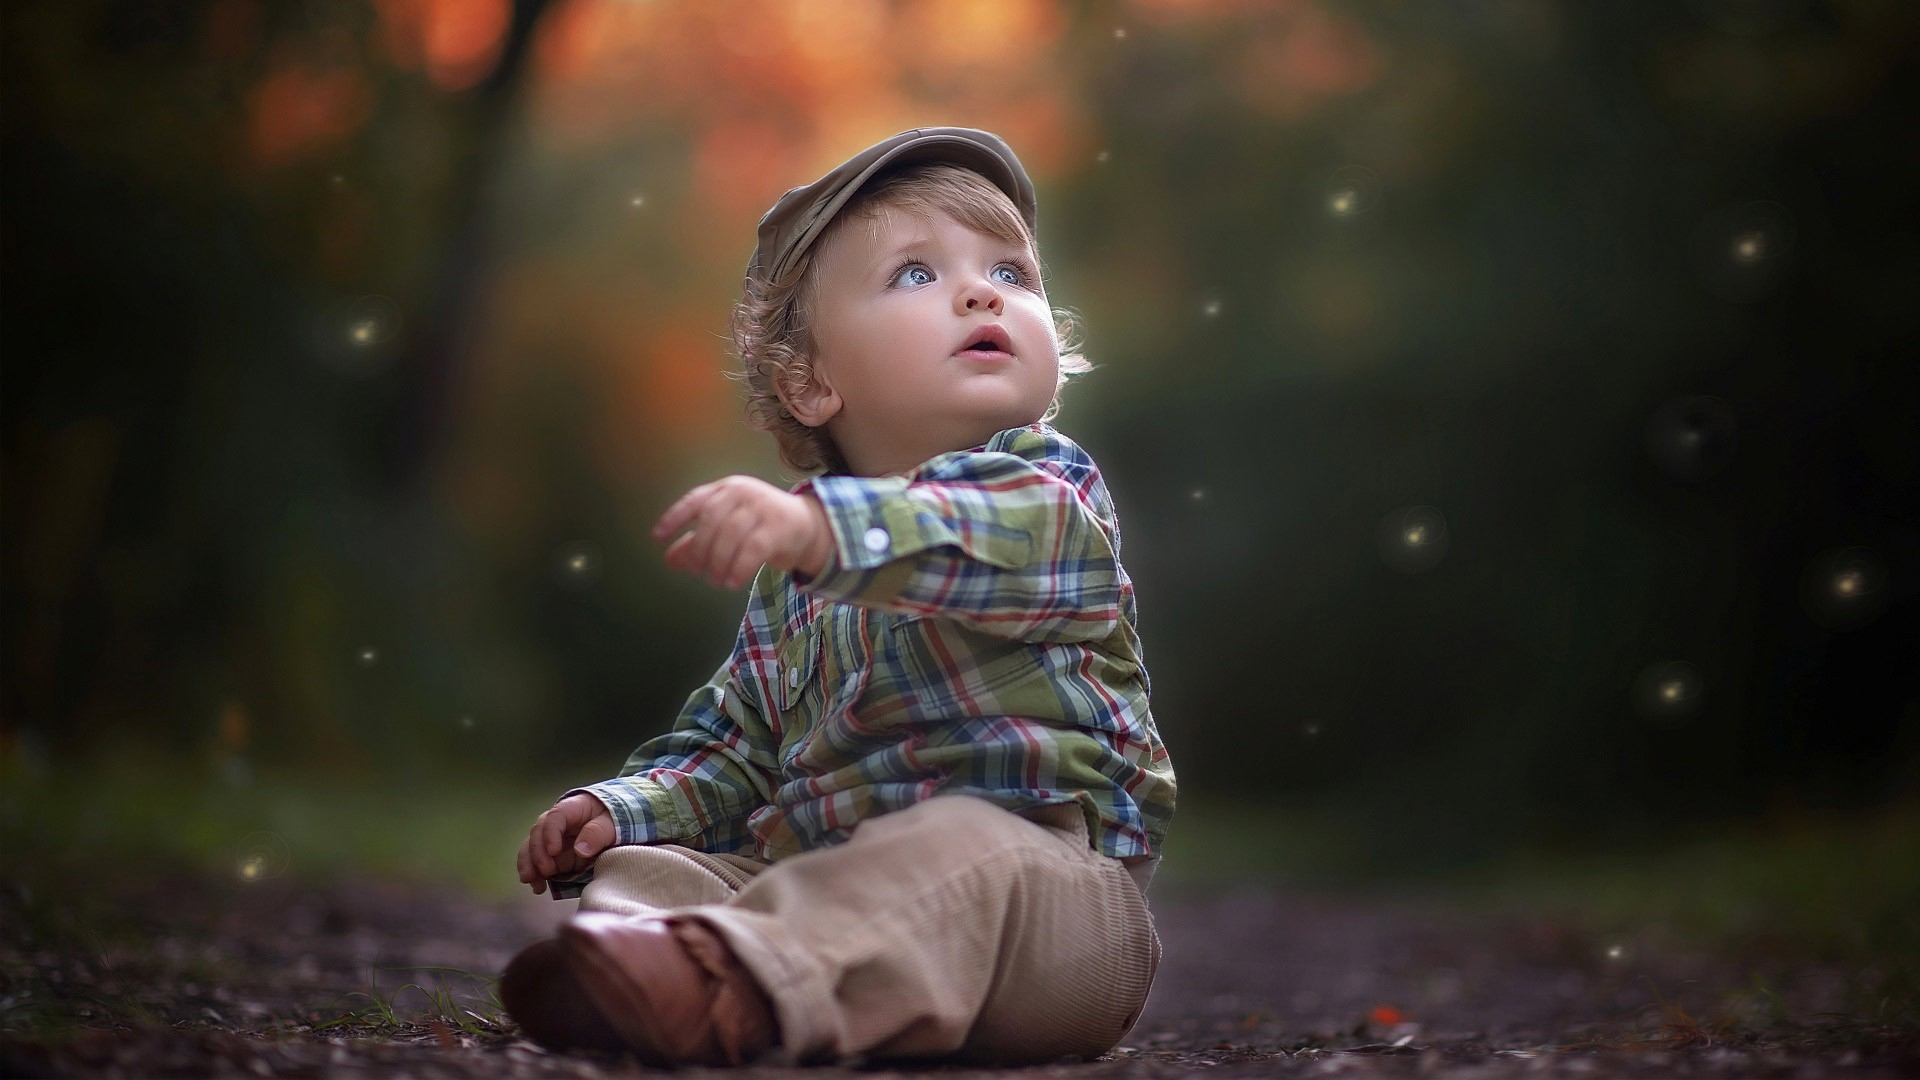 Cute Baby Boy Pictures Wallpapers - Full Hd Cute Baby - 1920x1080 Wallpaper  